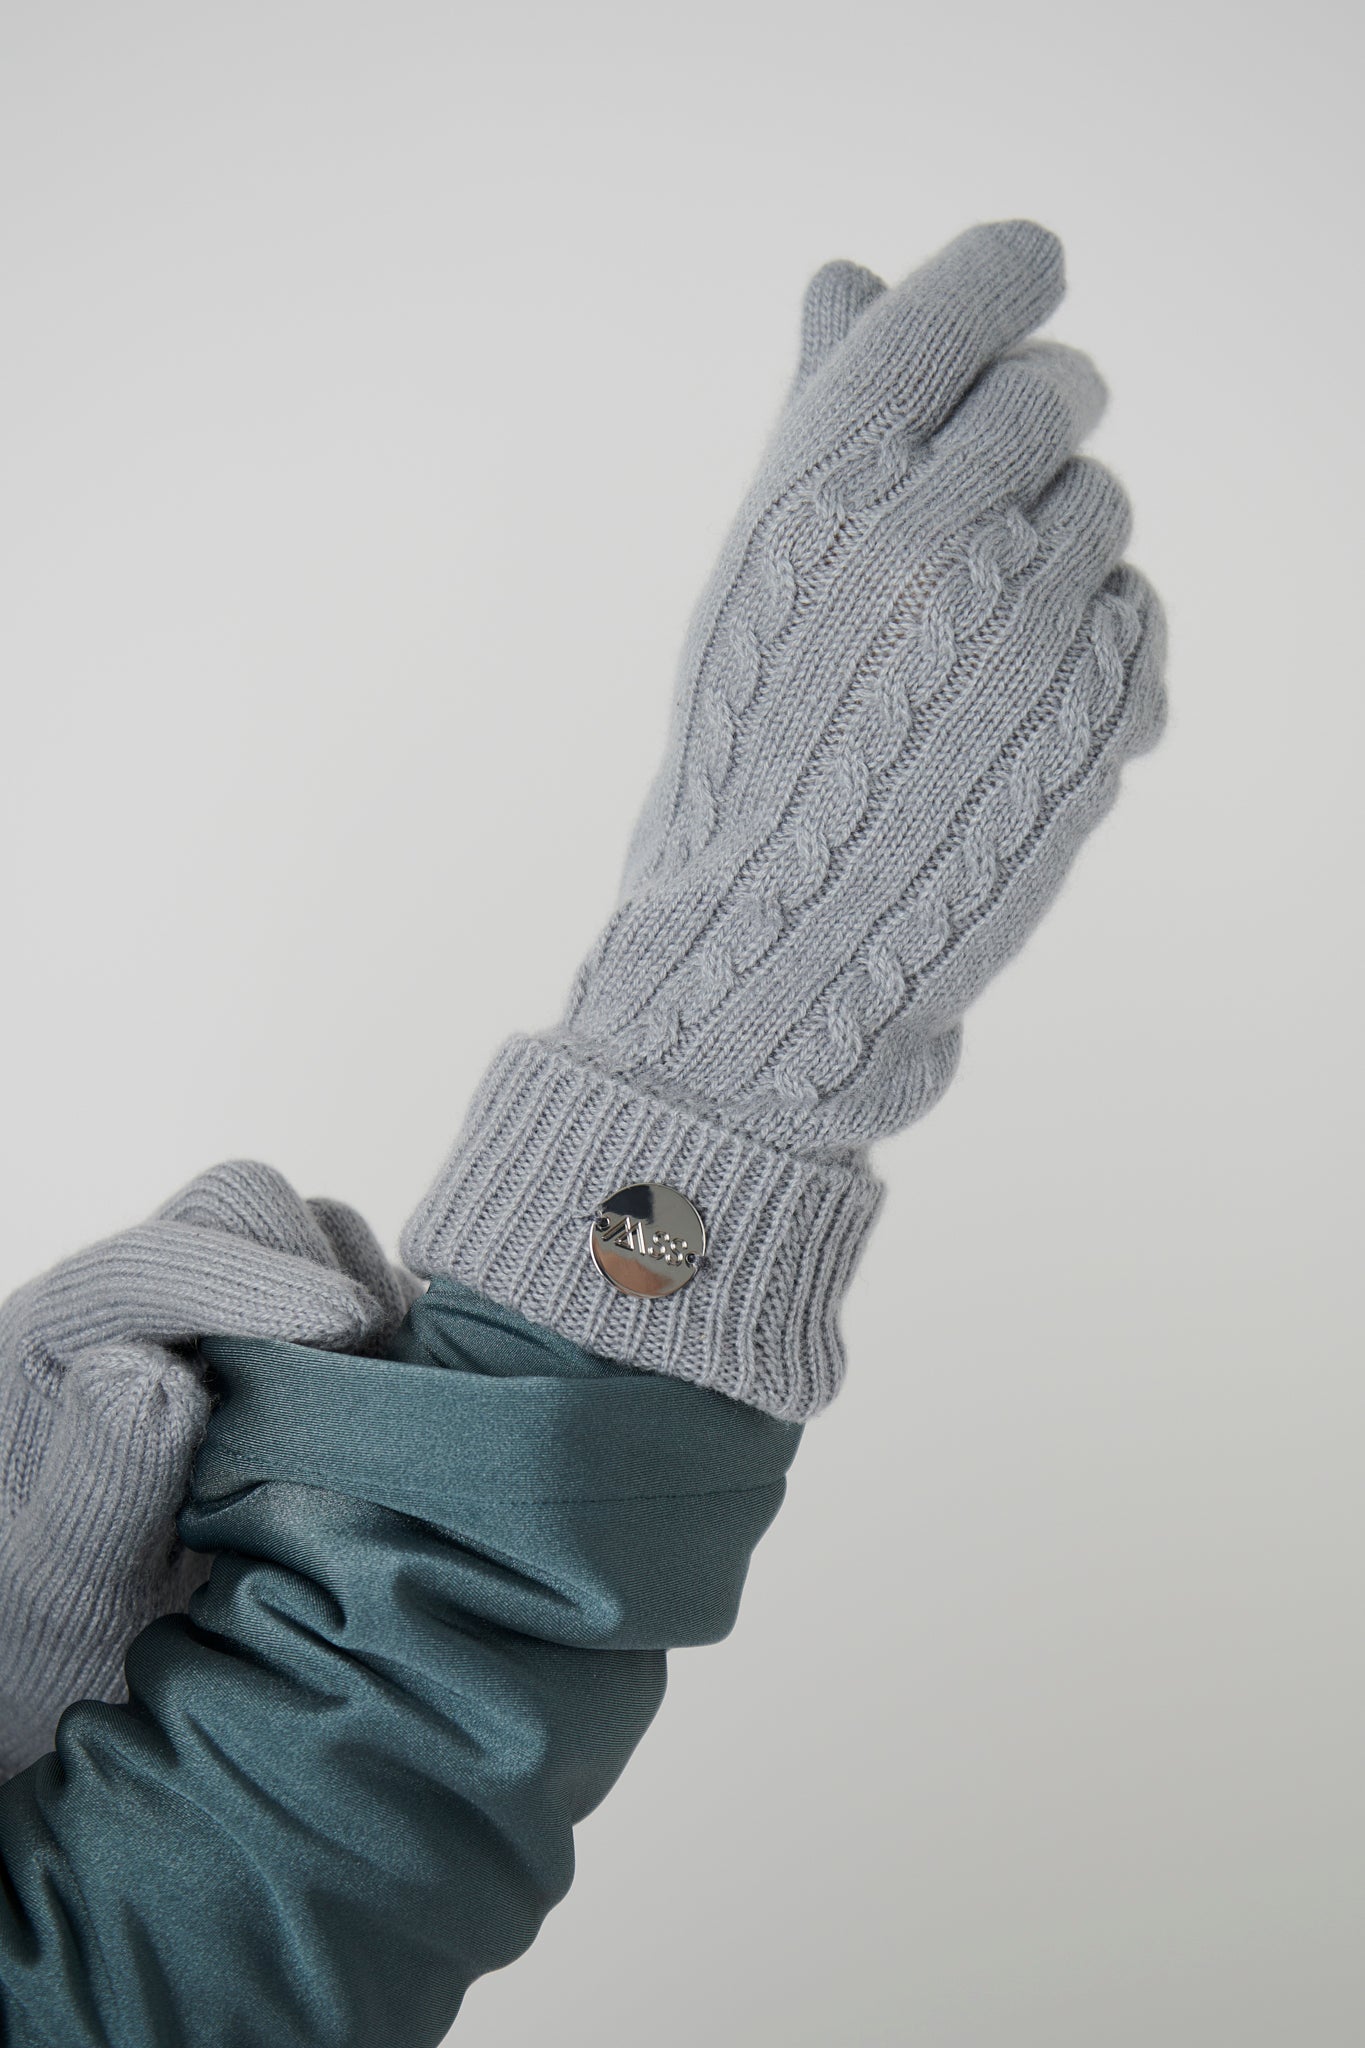 Cashmere Cable Gloves - Grey / Blue